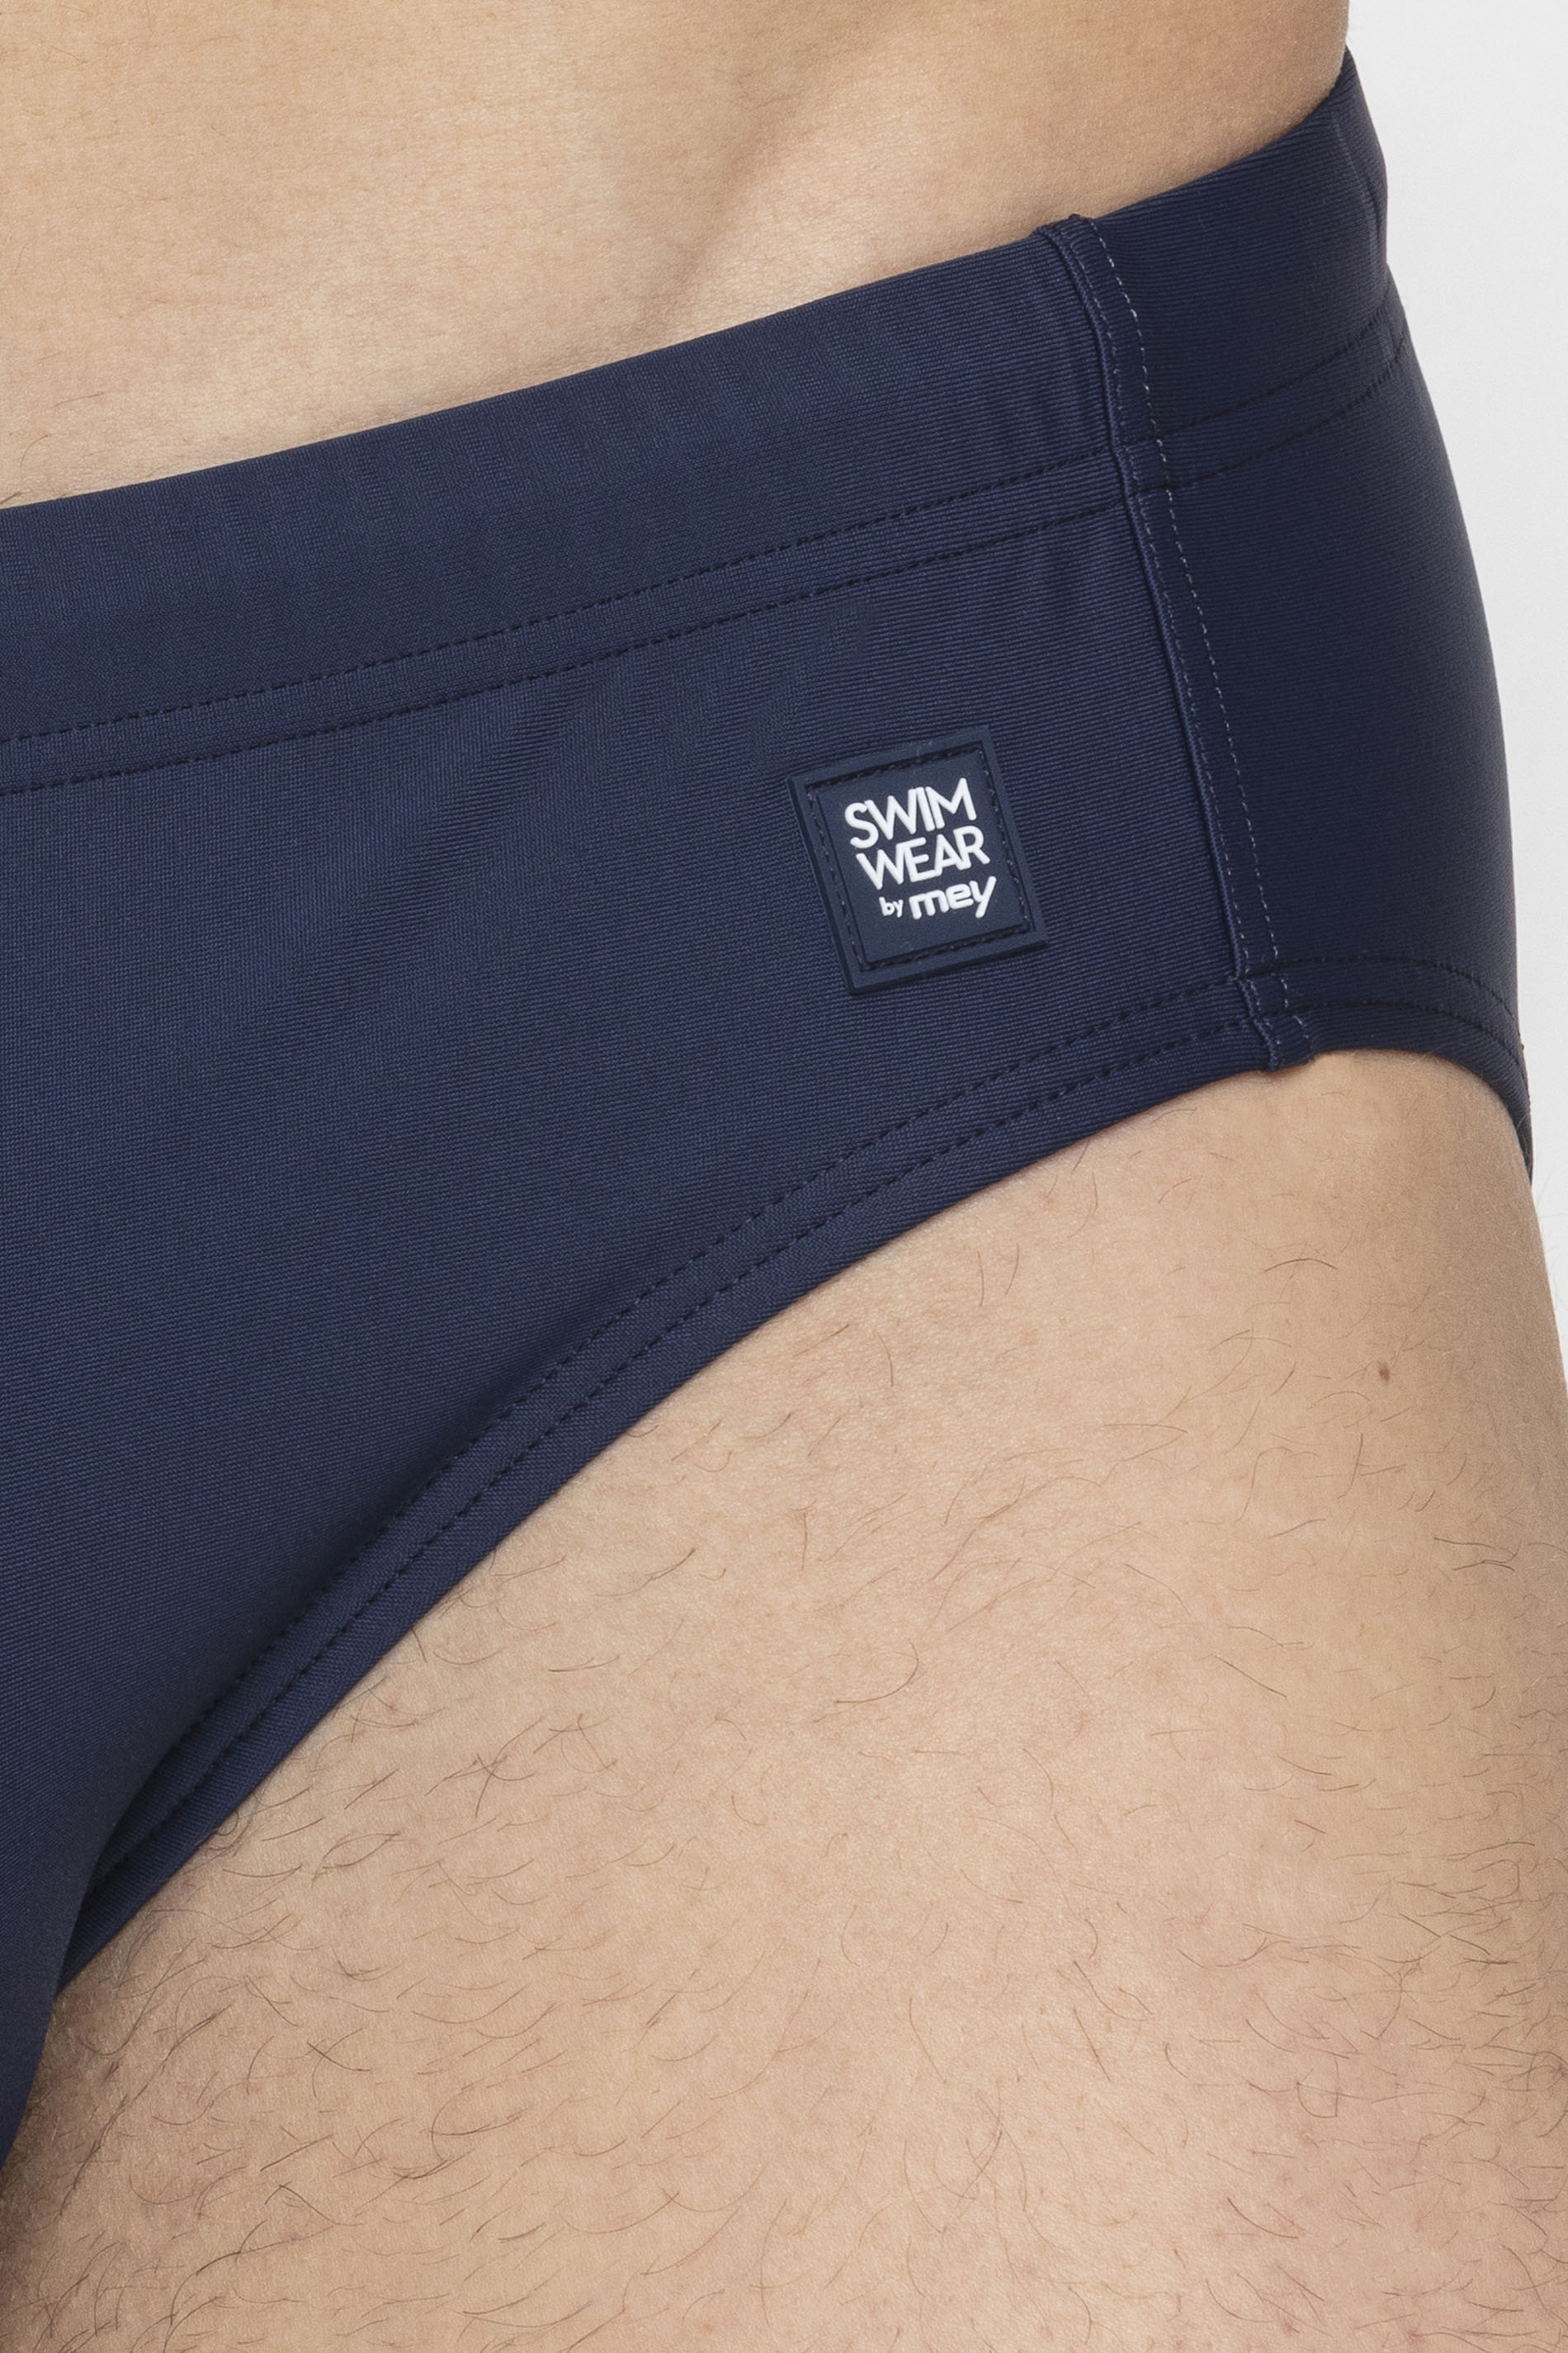 Badehose Yacht Blue Serie English Harbour  Detail View 01 | mey®